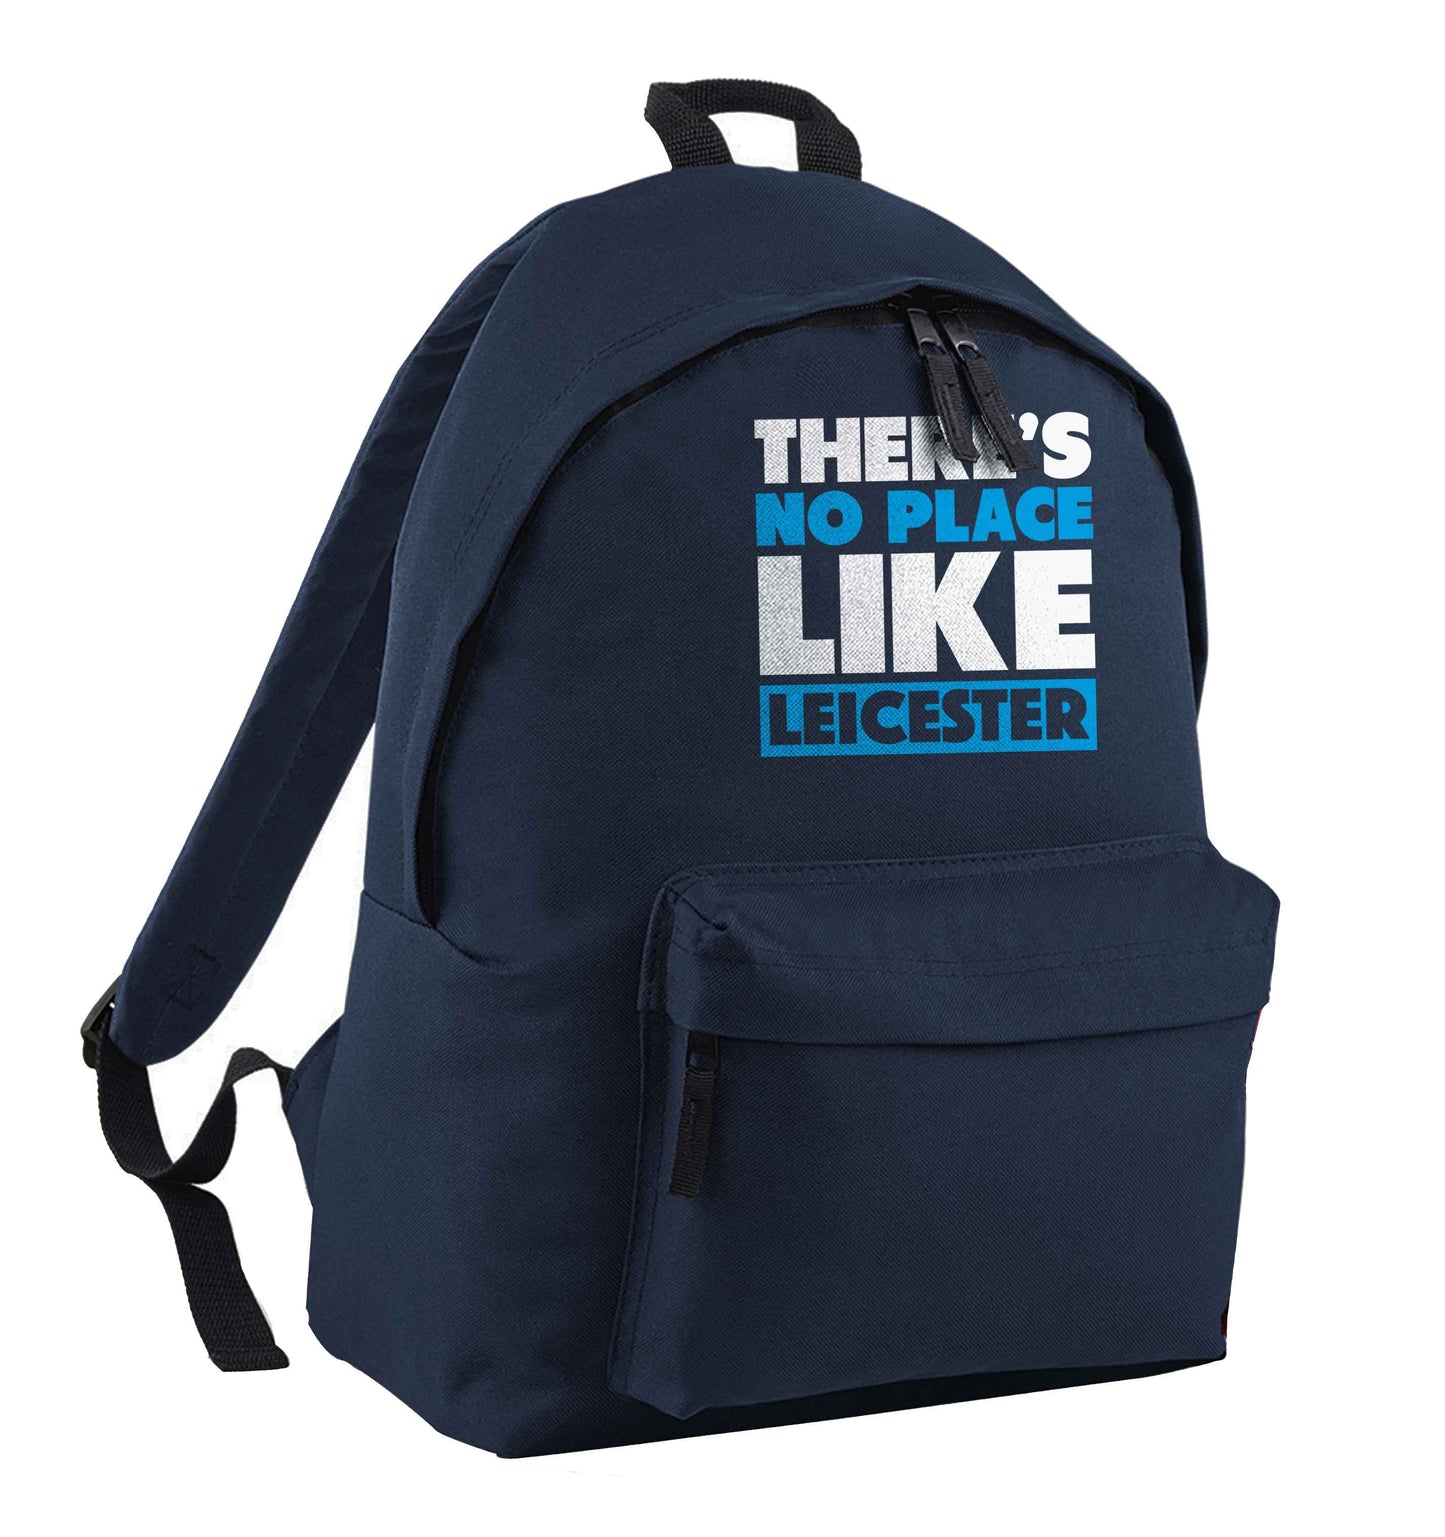 There's no place like Leicester navy children's backpack